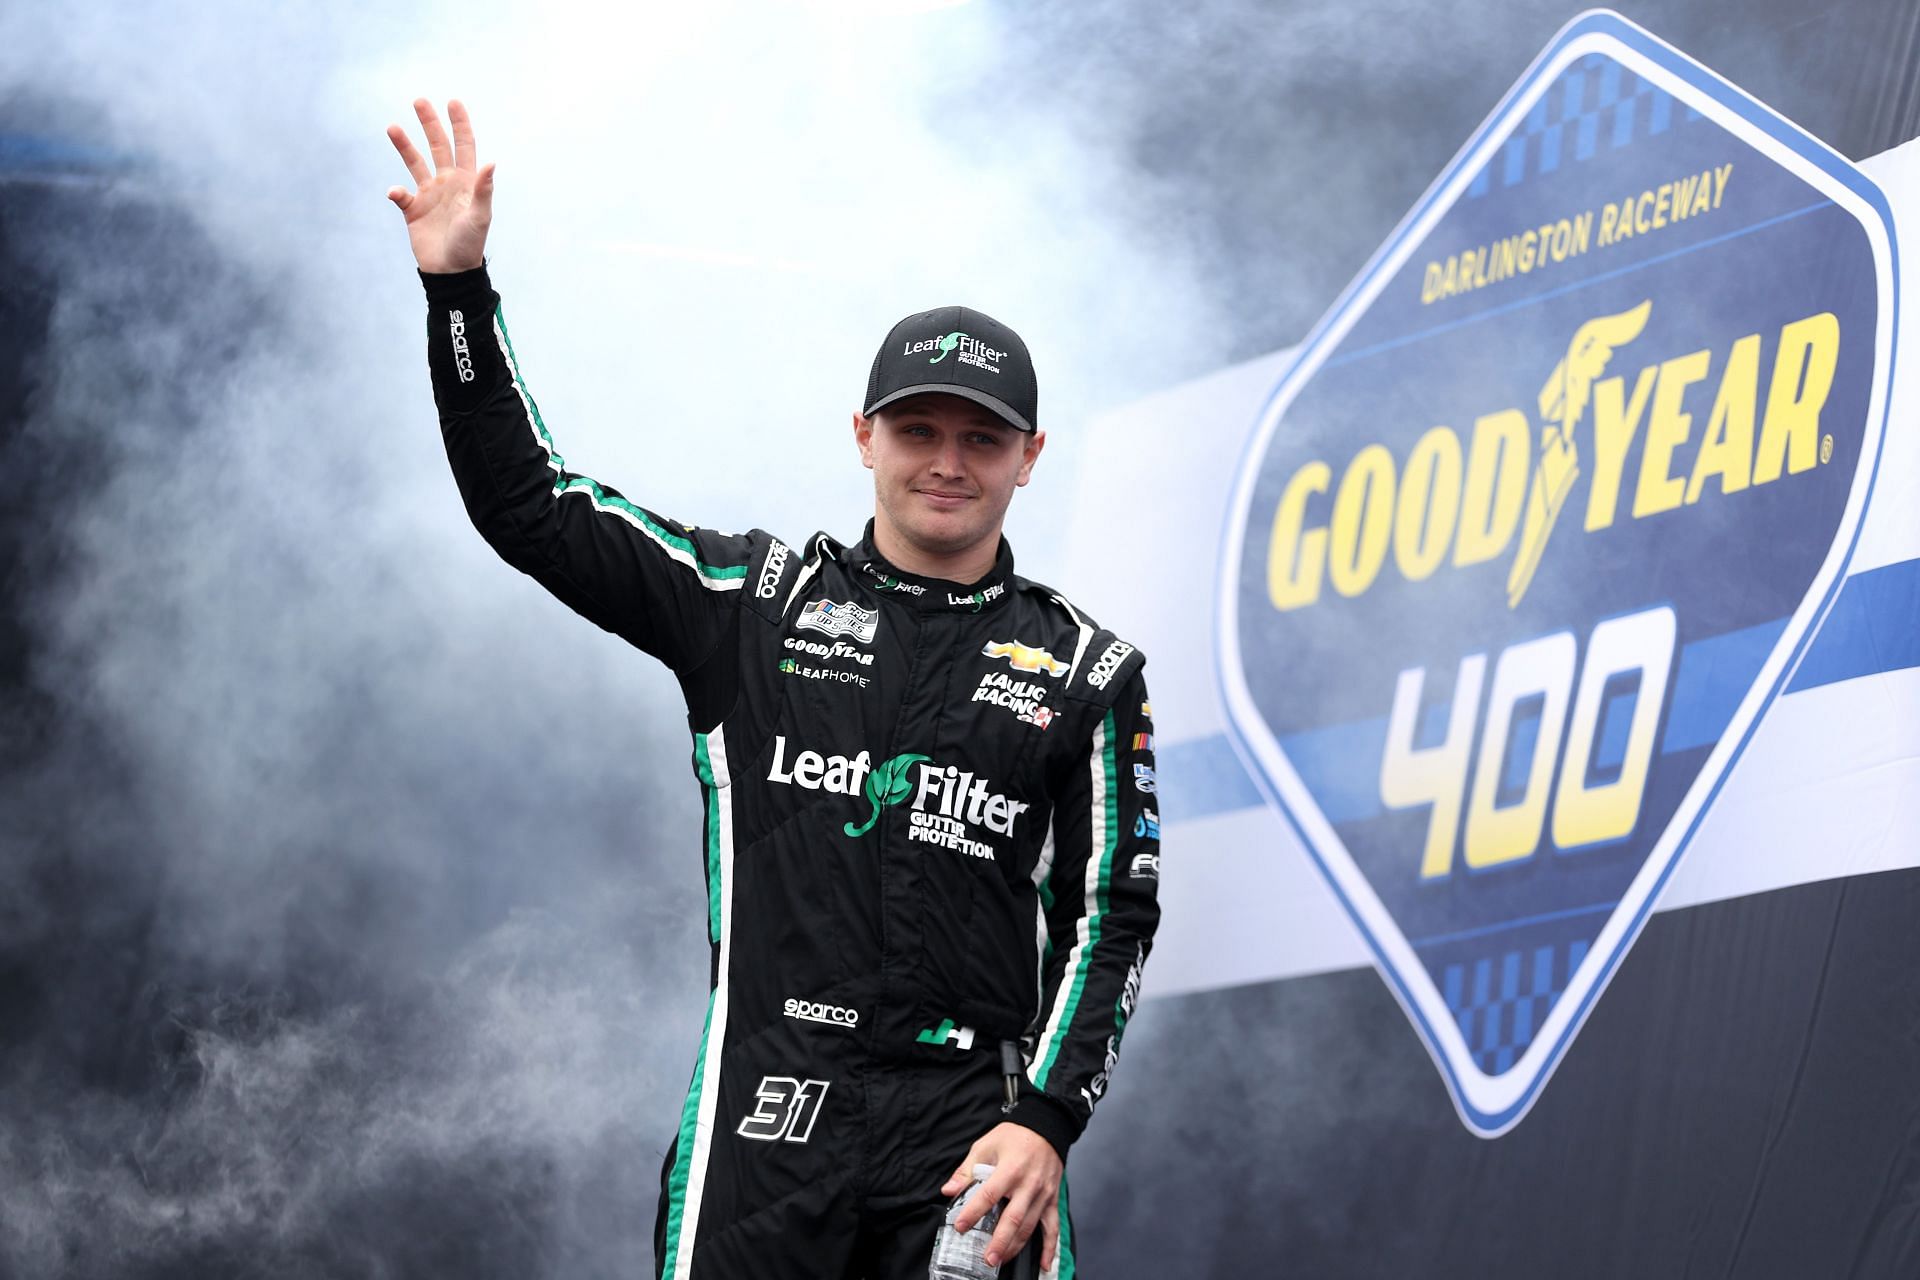 Justin Haley waves to fans as he walks onstage during driver intros before the 2022 NASCAR Cup Series Goodyear 400 at Darlington Raceway in Darlington, South Carolina. (Photo by James Gilbert/Getty Images)